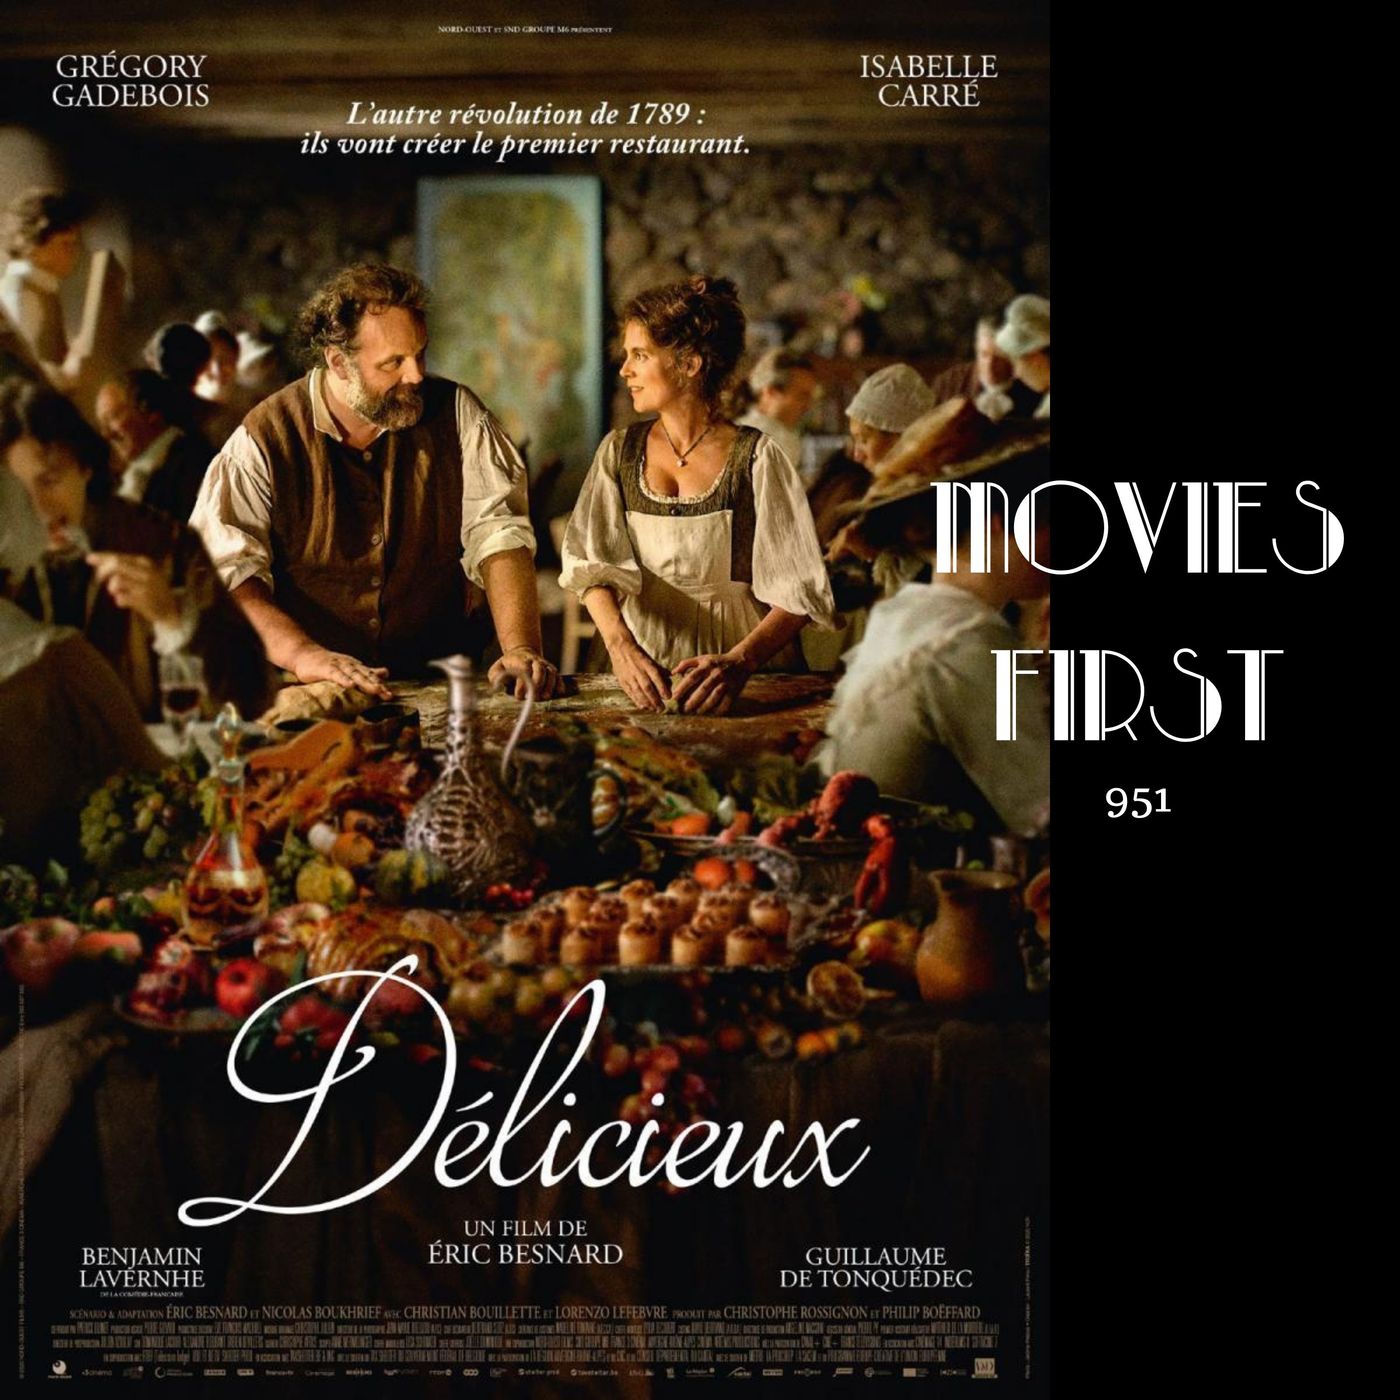 Delicious (Comedy, Drama, History) (French) (review)